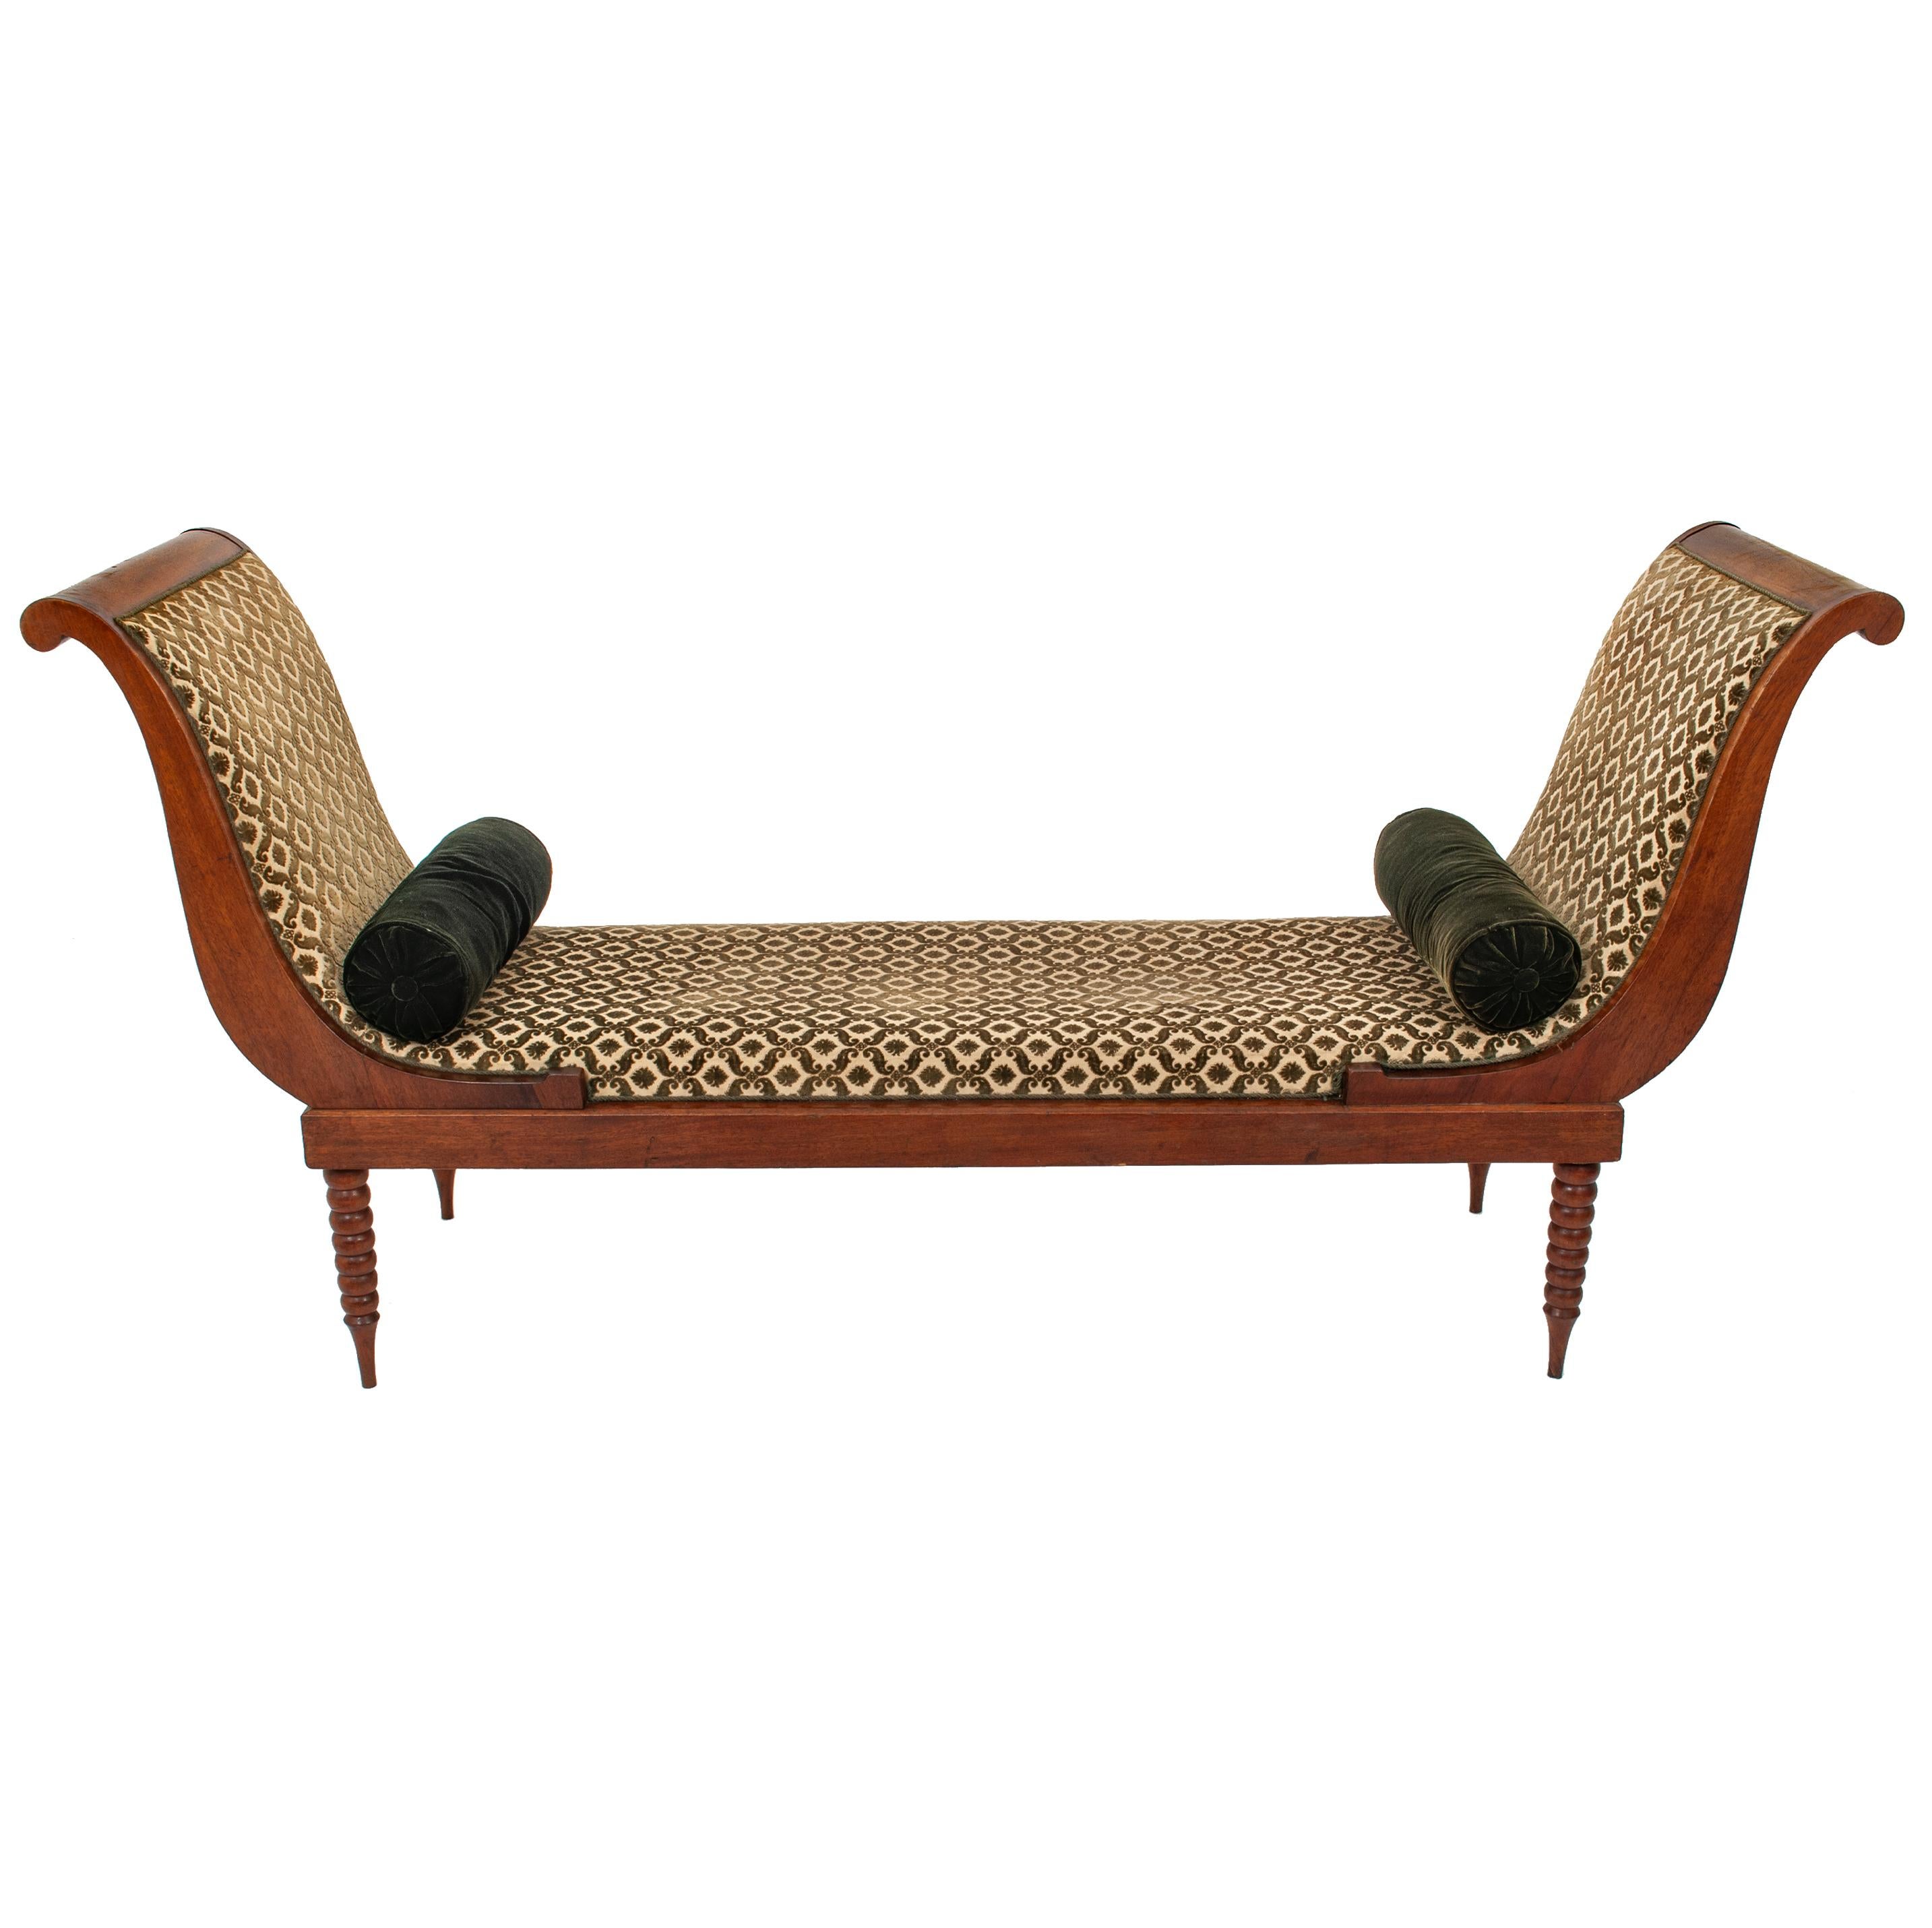 A good antique American neoclassical mahogany bustle bench, window seat, daybed, circa 1860.
The bench having out-swept ends with a curvilinear design and upholstered in a high quality embossed velvet and raised on tapering bobbin legs.
The bench